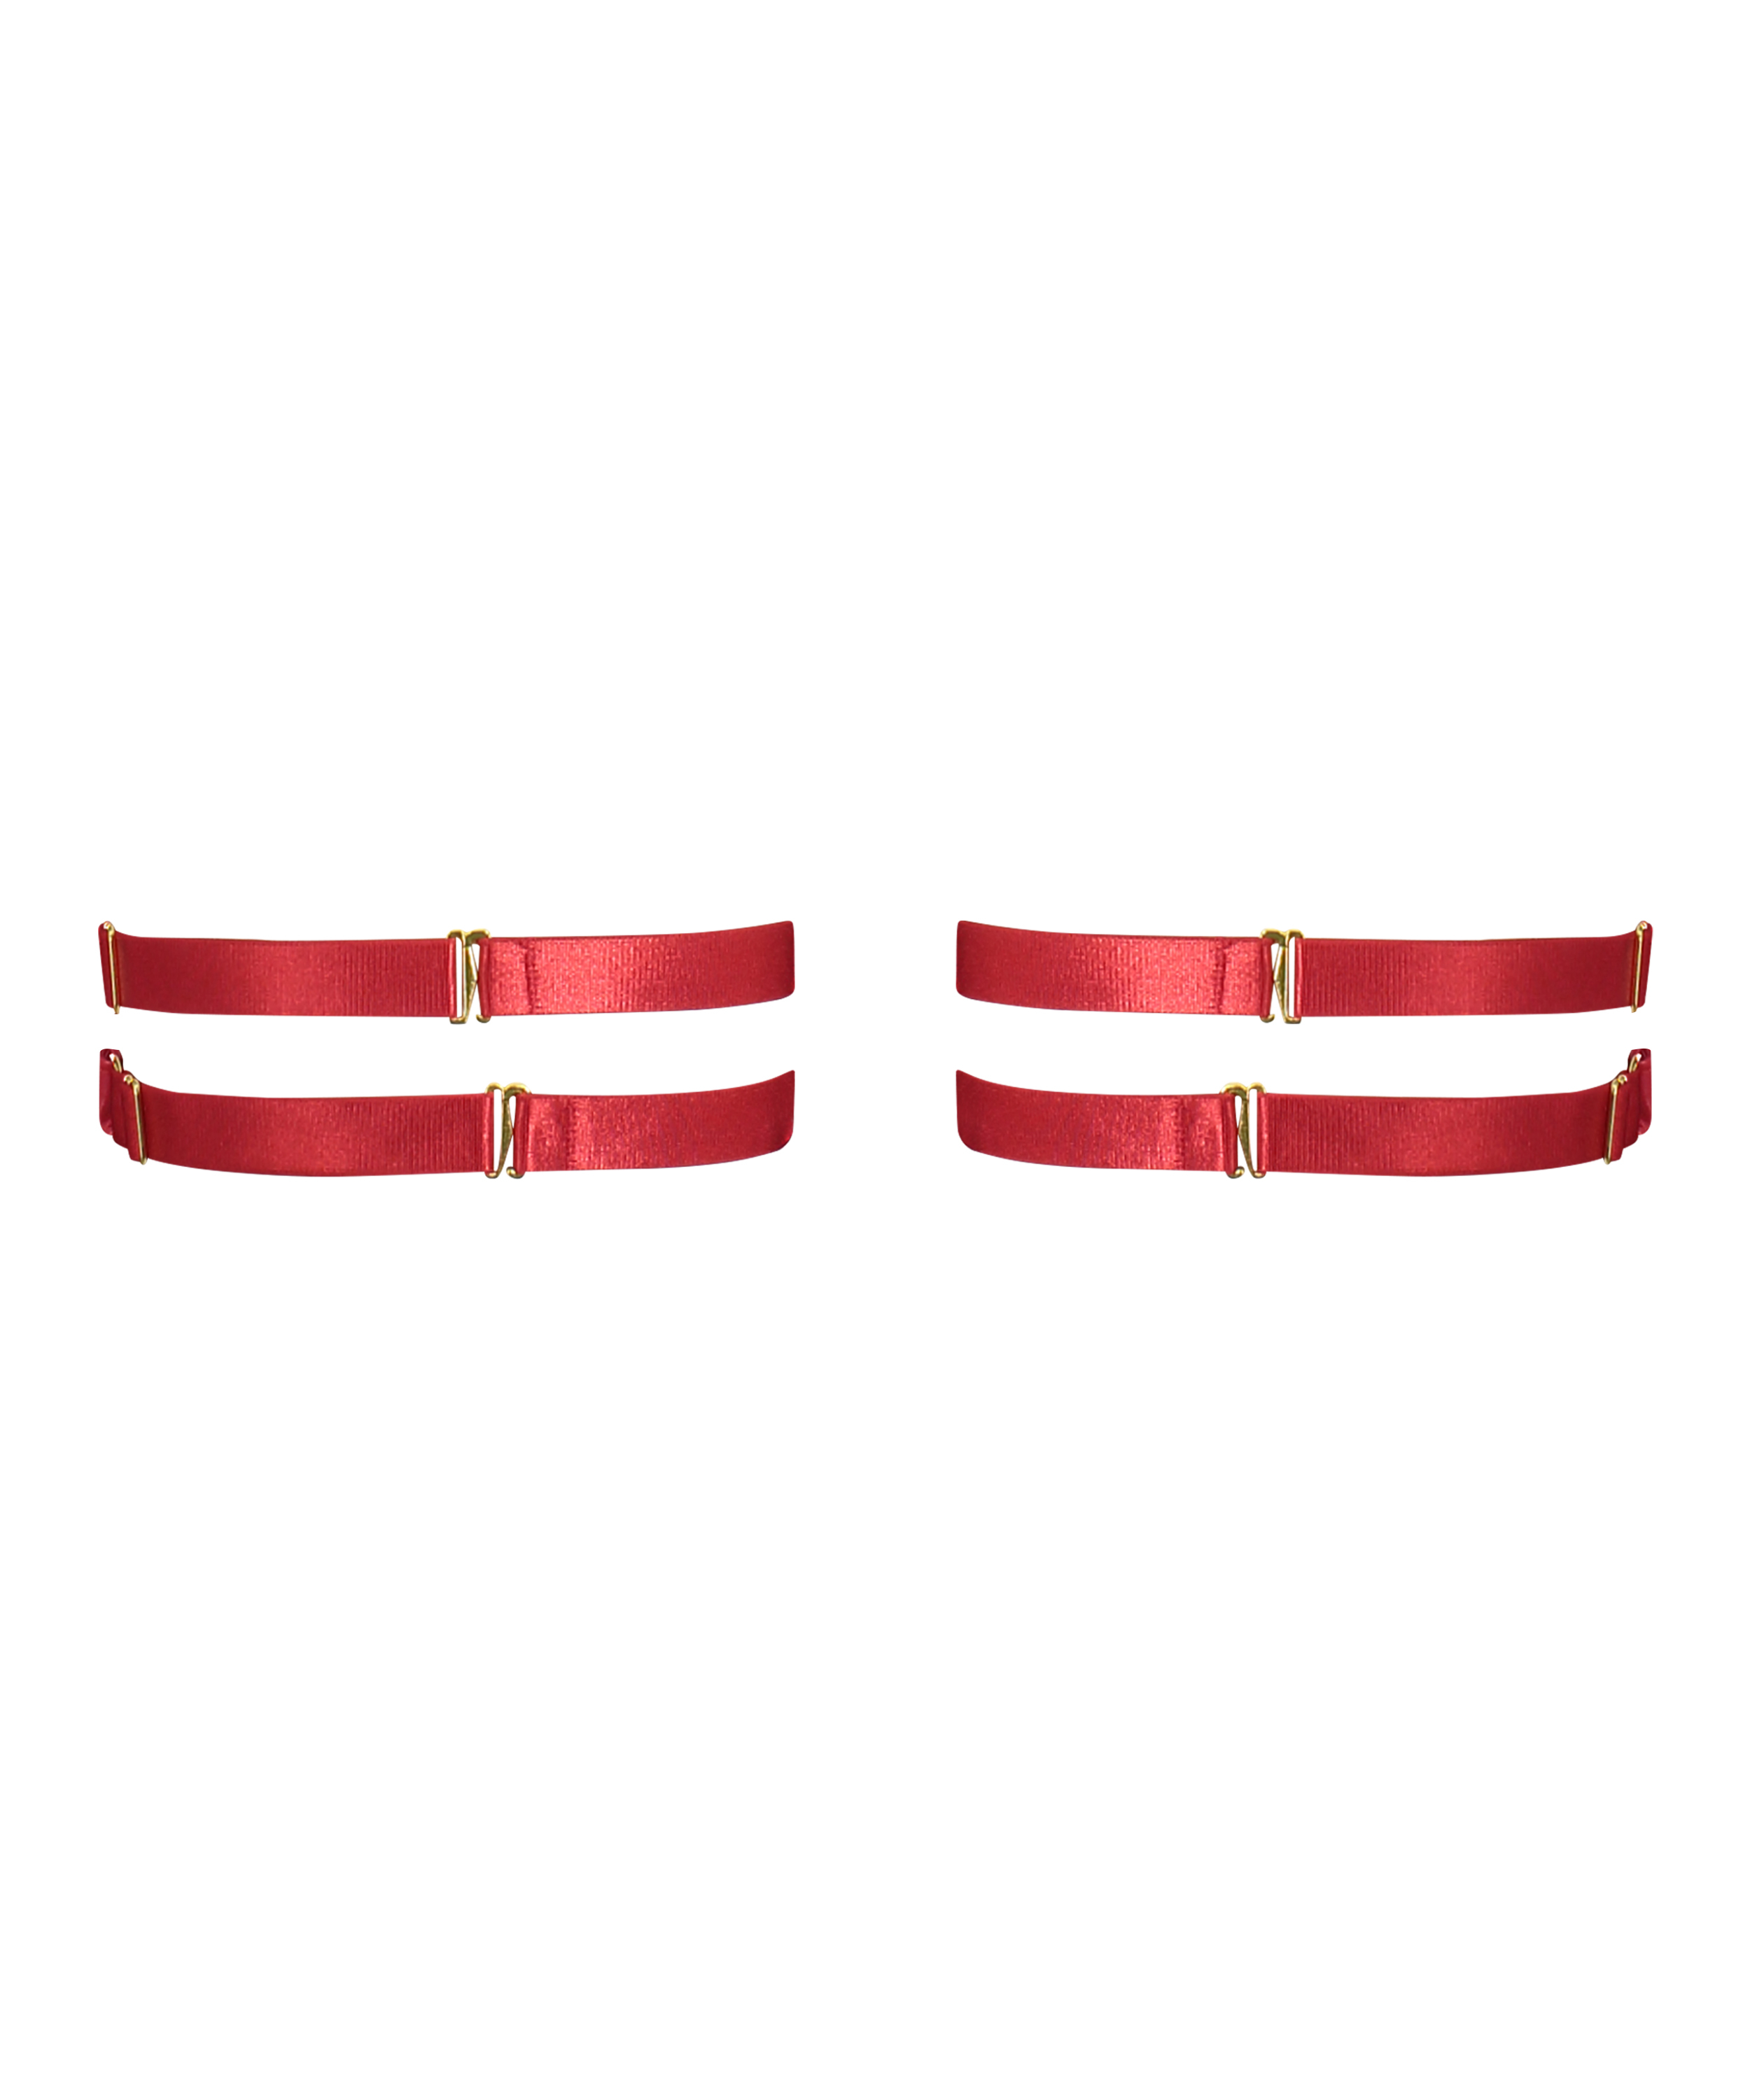 Private Heart Hold Up Suspenders, Red, main